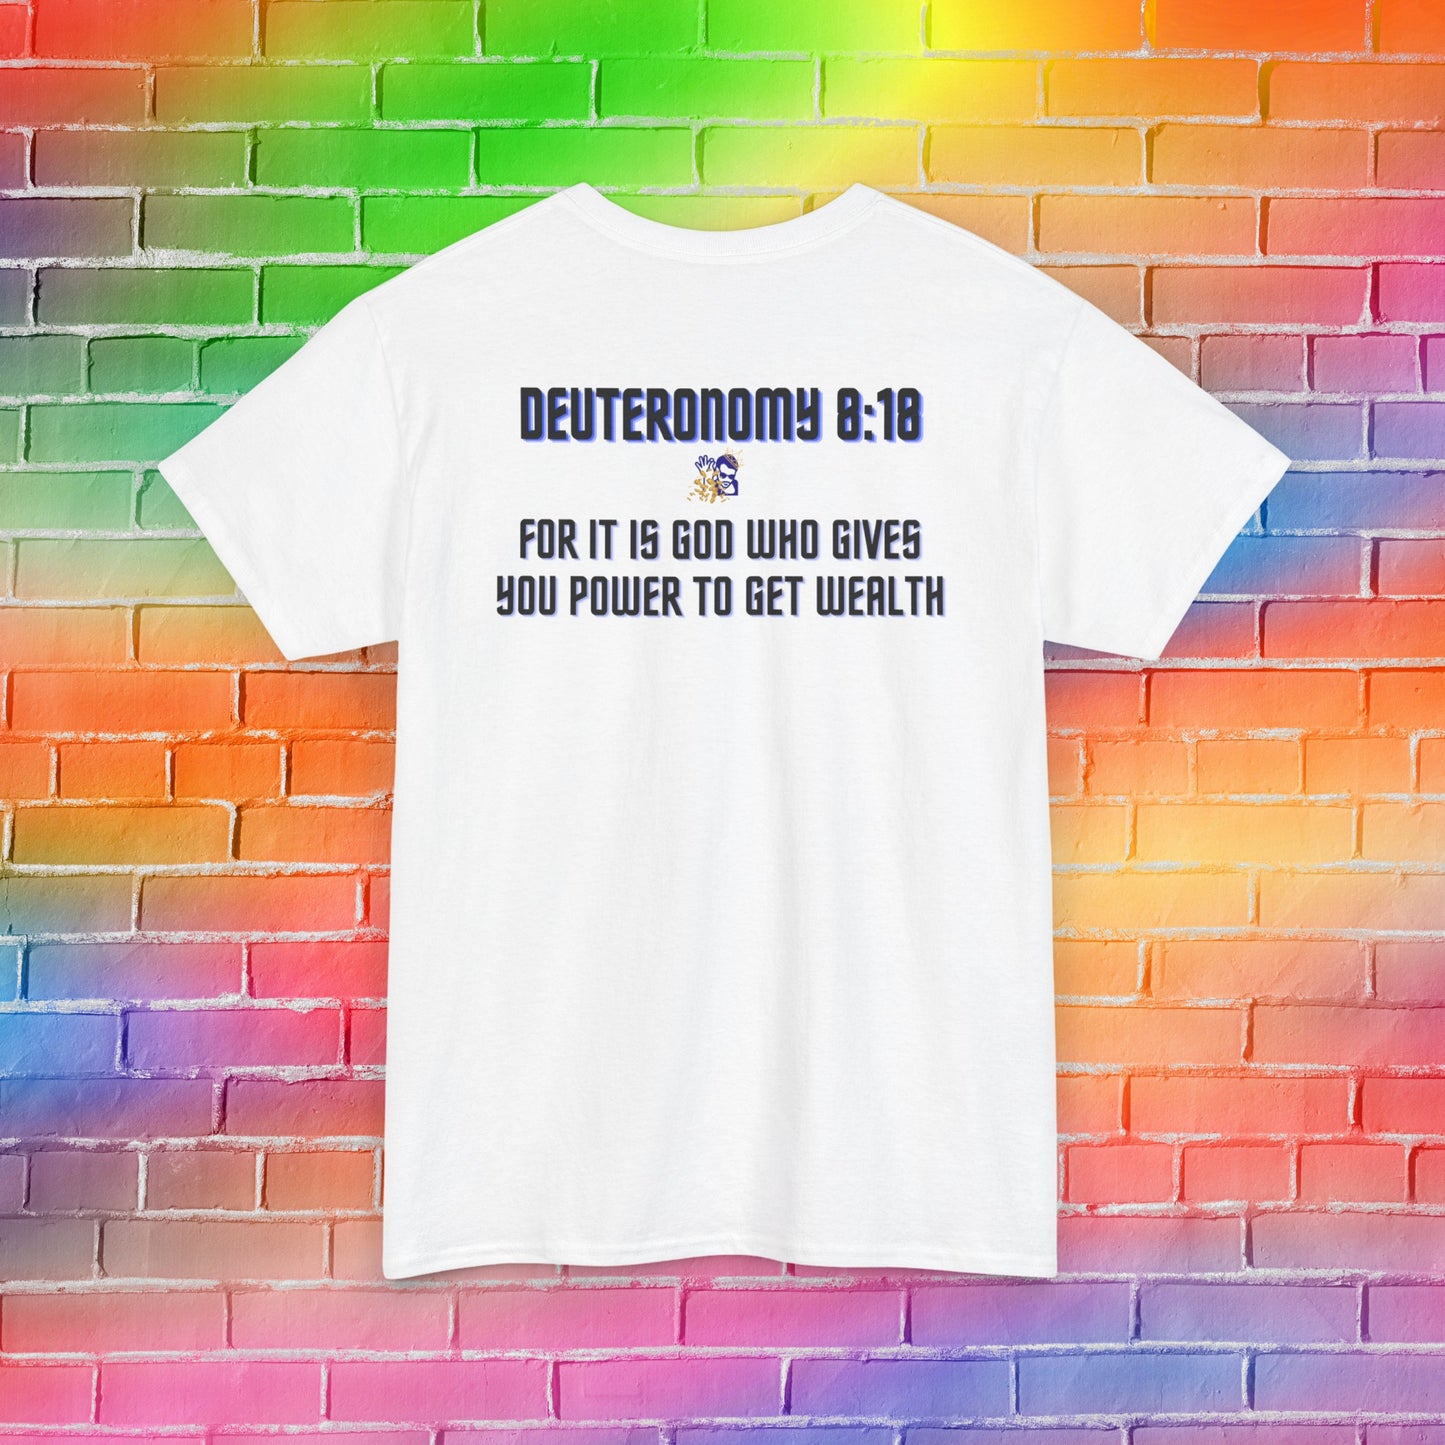 "Power to Get Wealth" Collection:  Deuteronomy 8:18 Men's Heavy Cotton T-Shirts